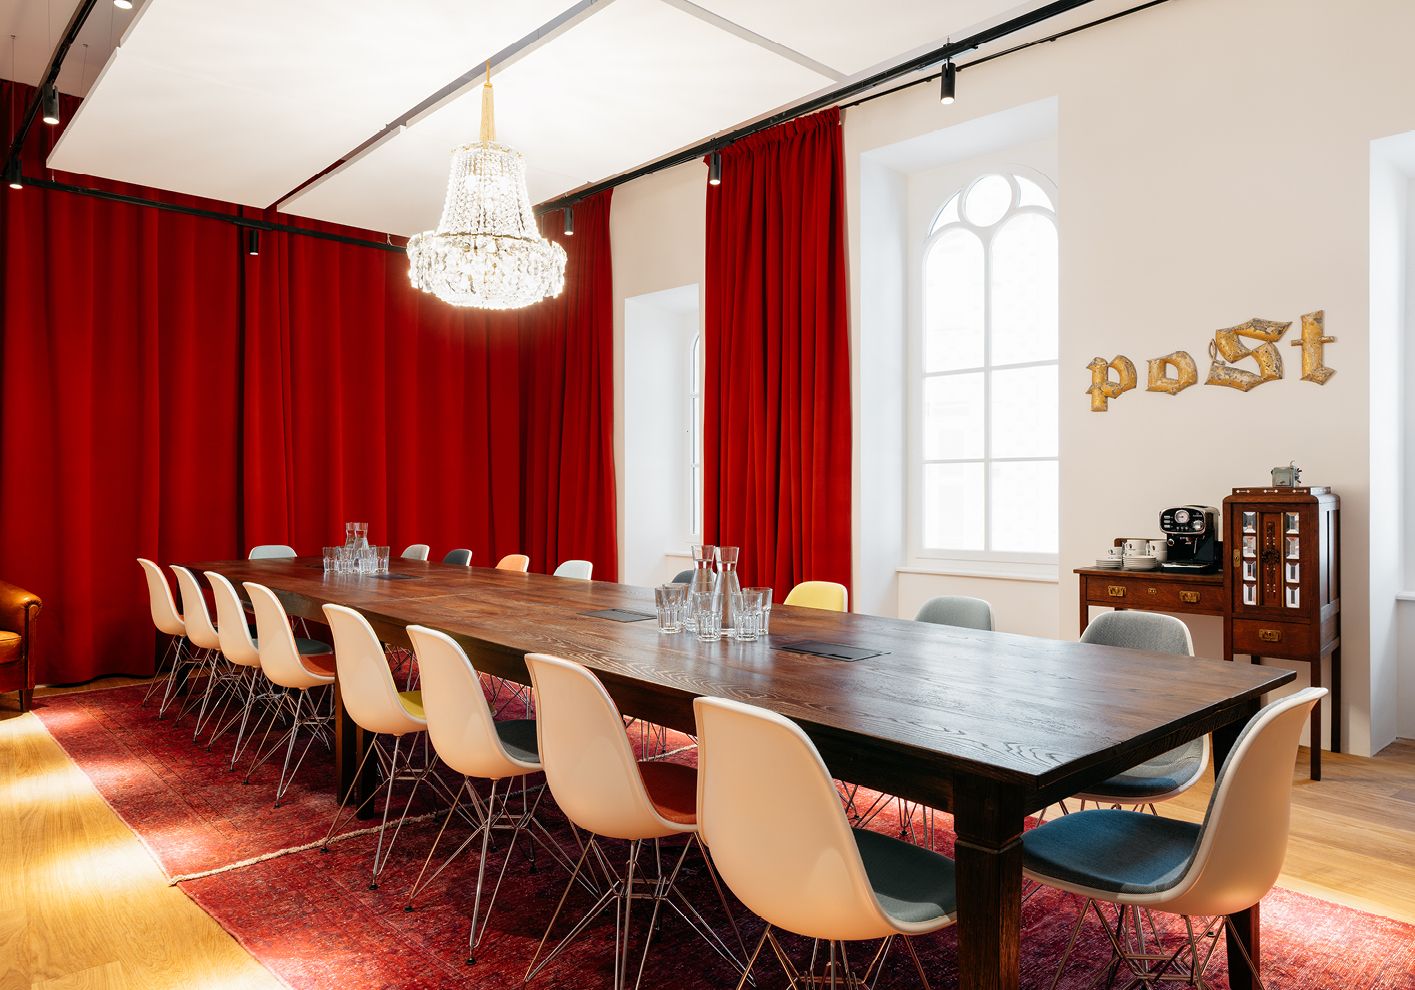 One of Ruby Paul's airy, well-appointed meeting rooms